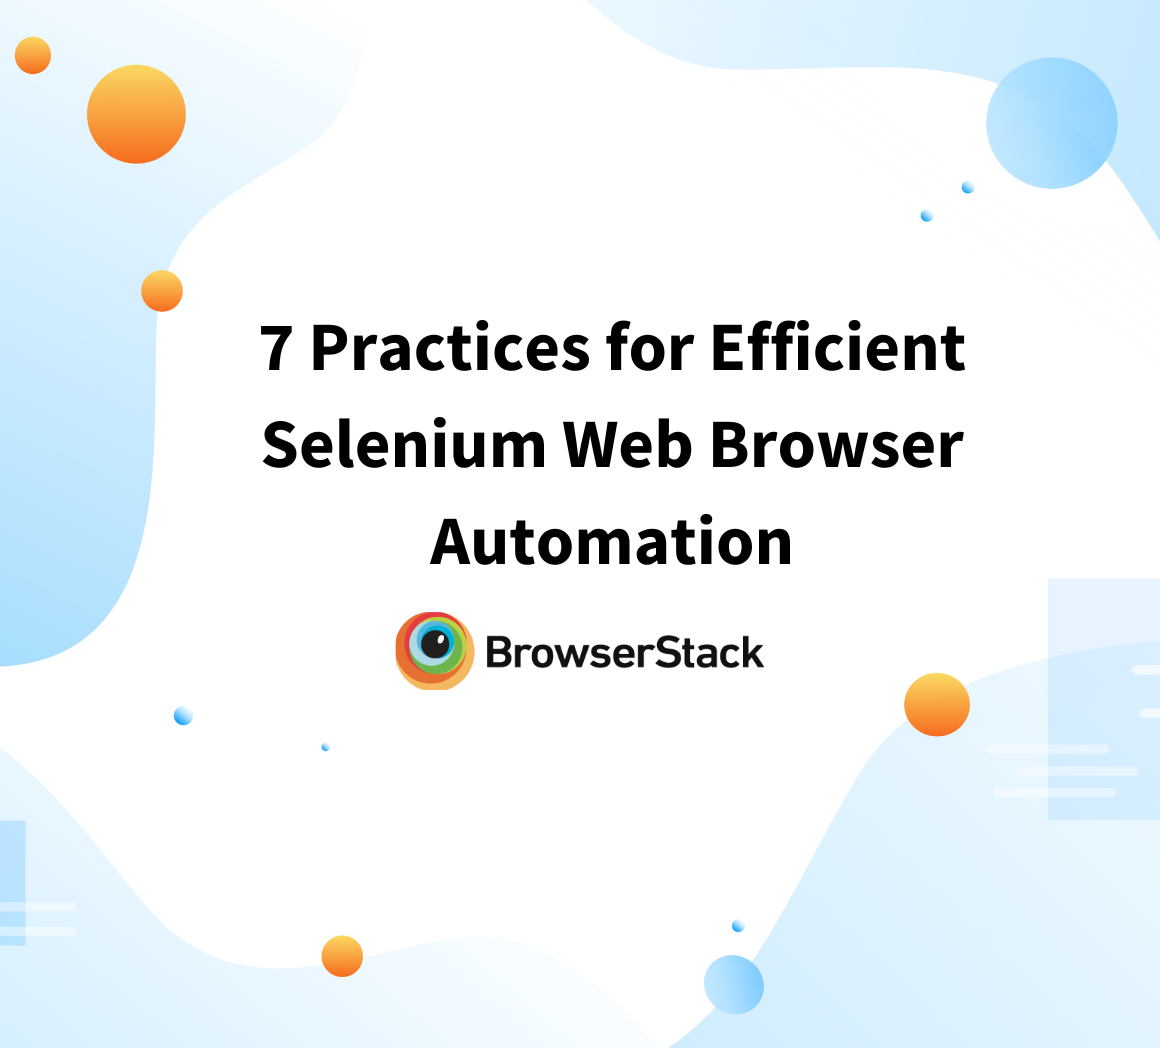 Best practices for Selenium web browser automation